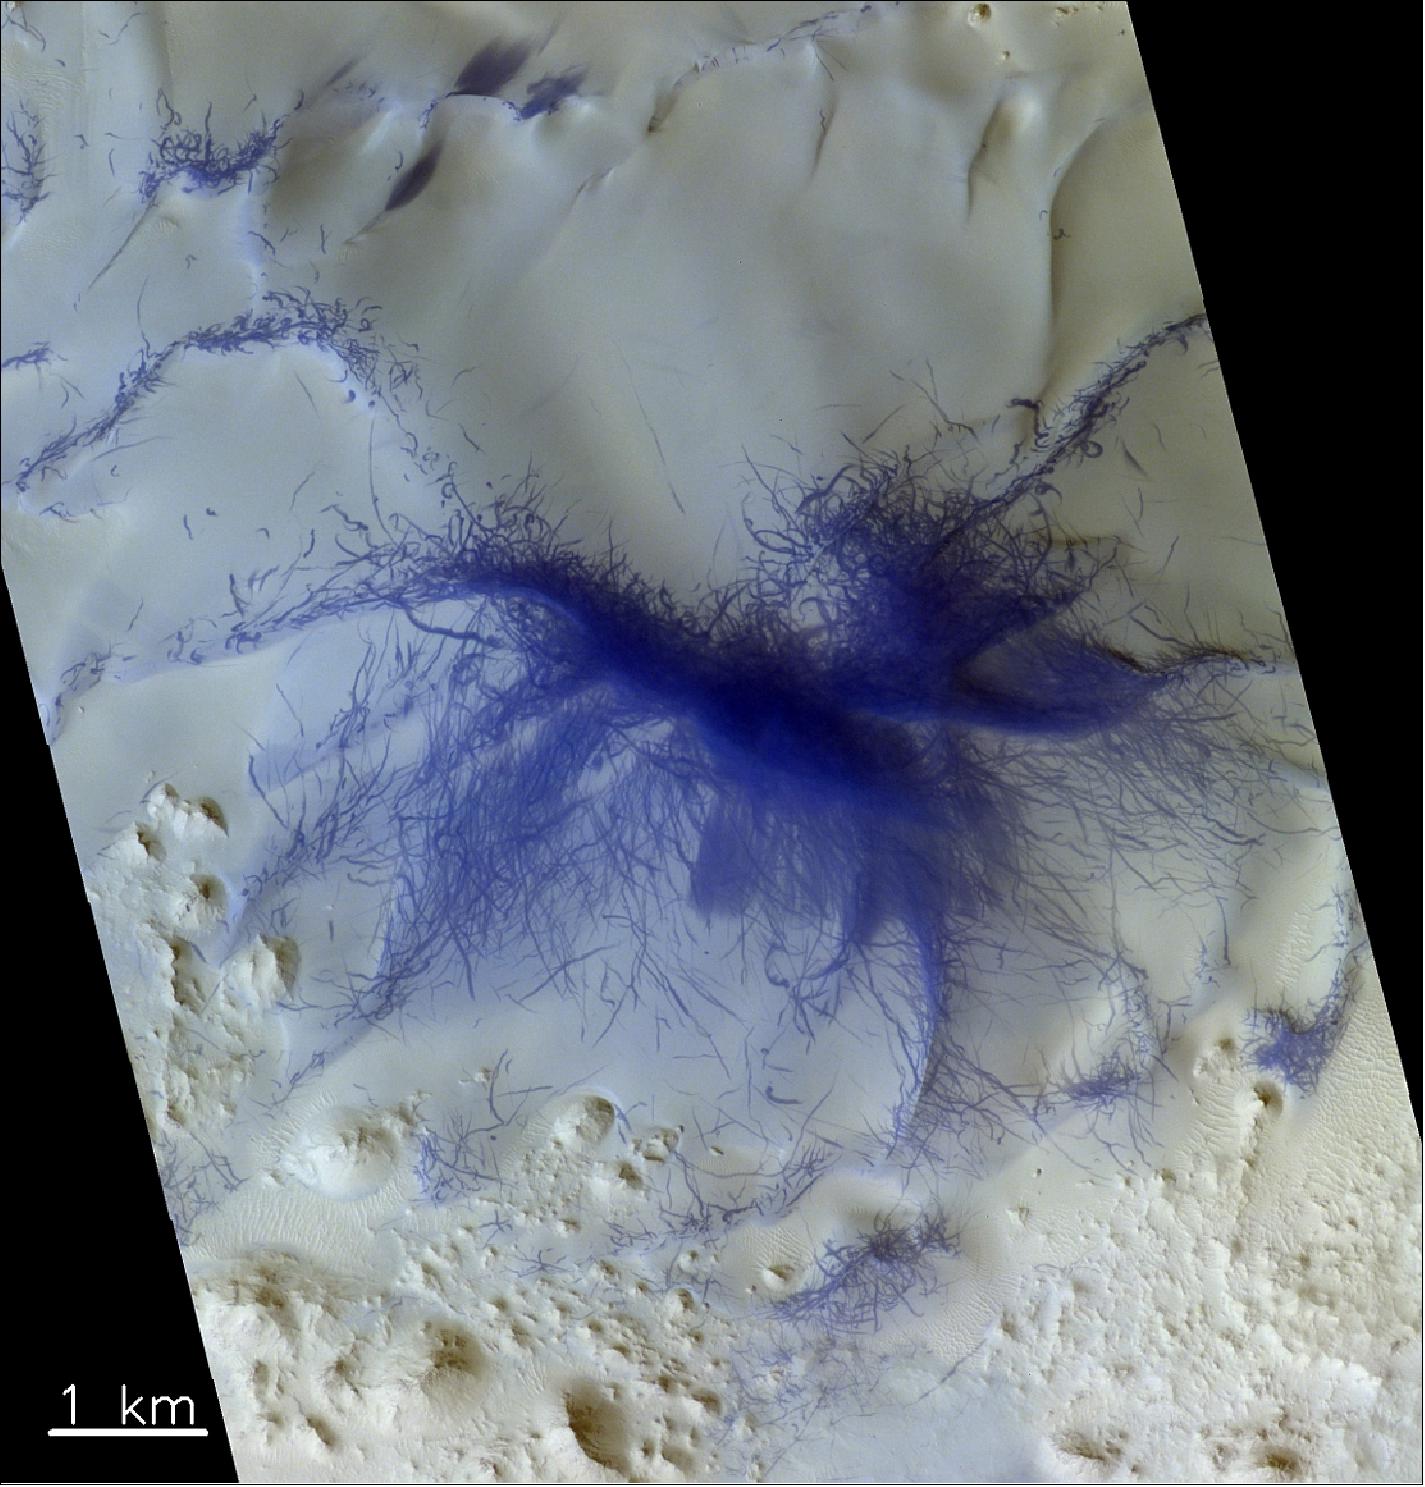 Figure 73: This remarkable image was taken in the Terra Sabaea region of Mars, west of Augakuh Vallis, by the CaSSIS (Color and Stereo Surface Imaging System) onboard the ESA-Roscosmos ExoMars TGO. This mysterious pattern sits on the crest of a ridge, and is thought to be the result of dust devil activity – essentially the convergence of hundreds or maybe even thousands of smaller martian tornadoes. The image was taken on 8 February 2019 and is centered at 26.36ºN/56.96ºE. North is up (image credit: ESA/Roscosmos/CaSSIS, CC BY-SA 3.0 IGO)